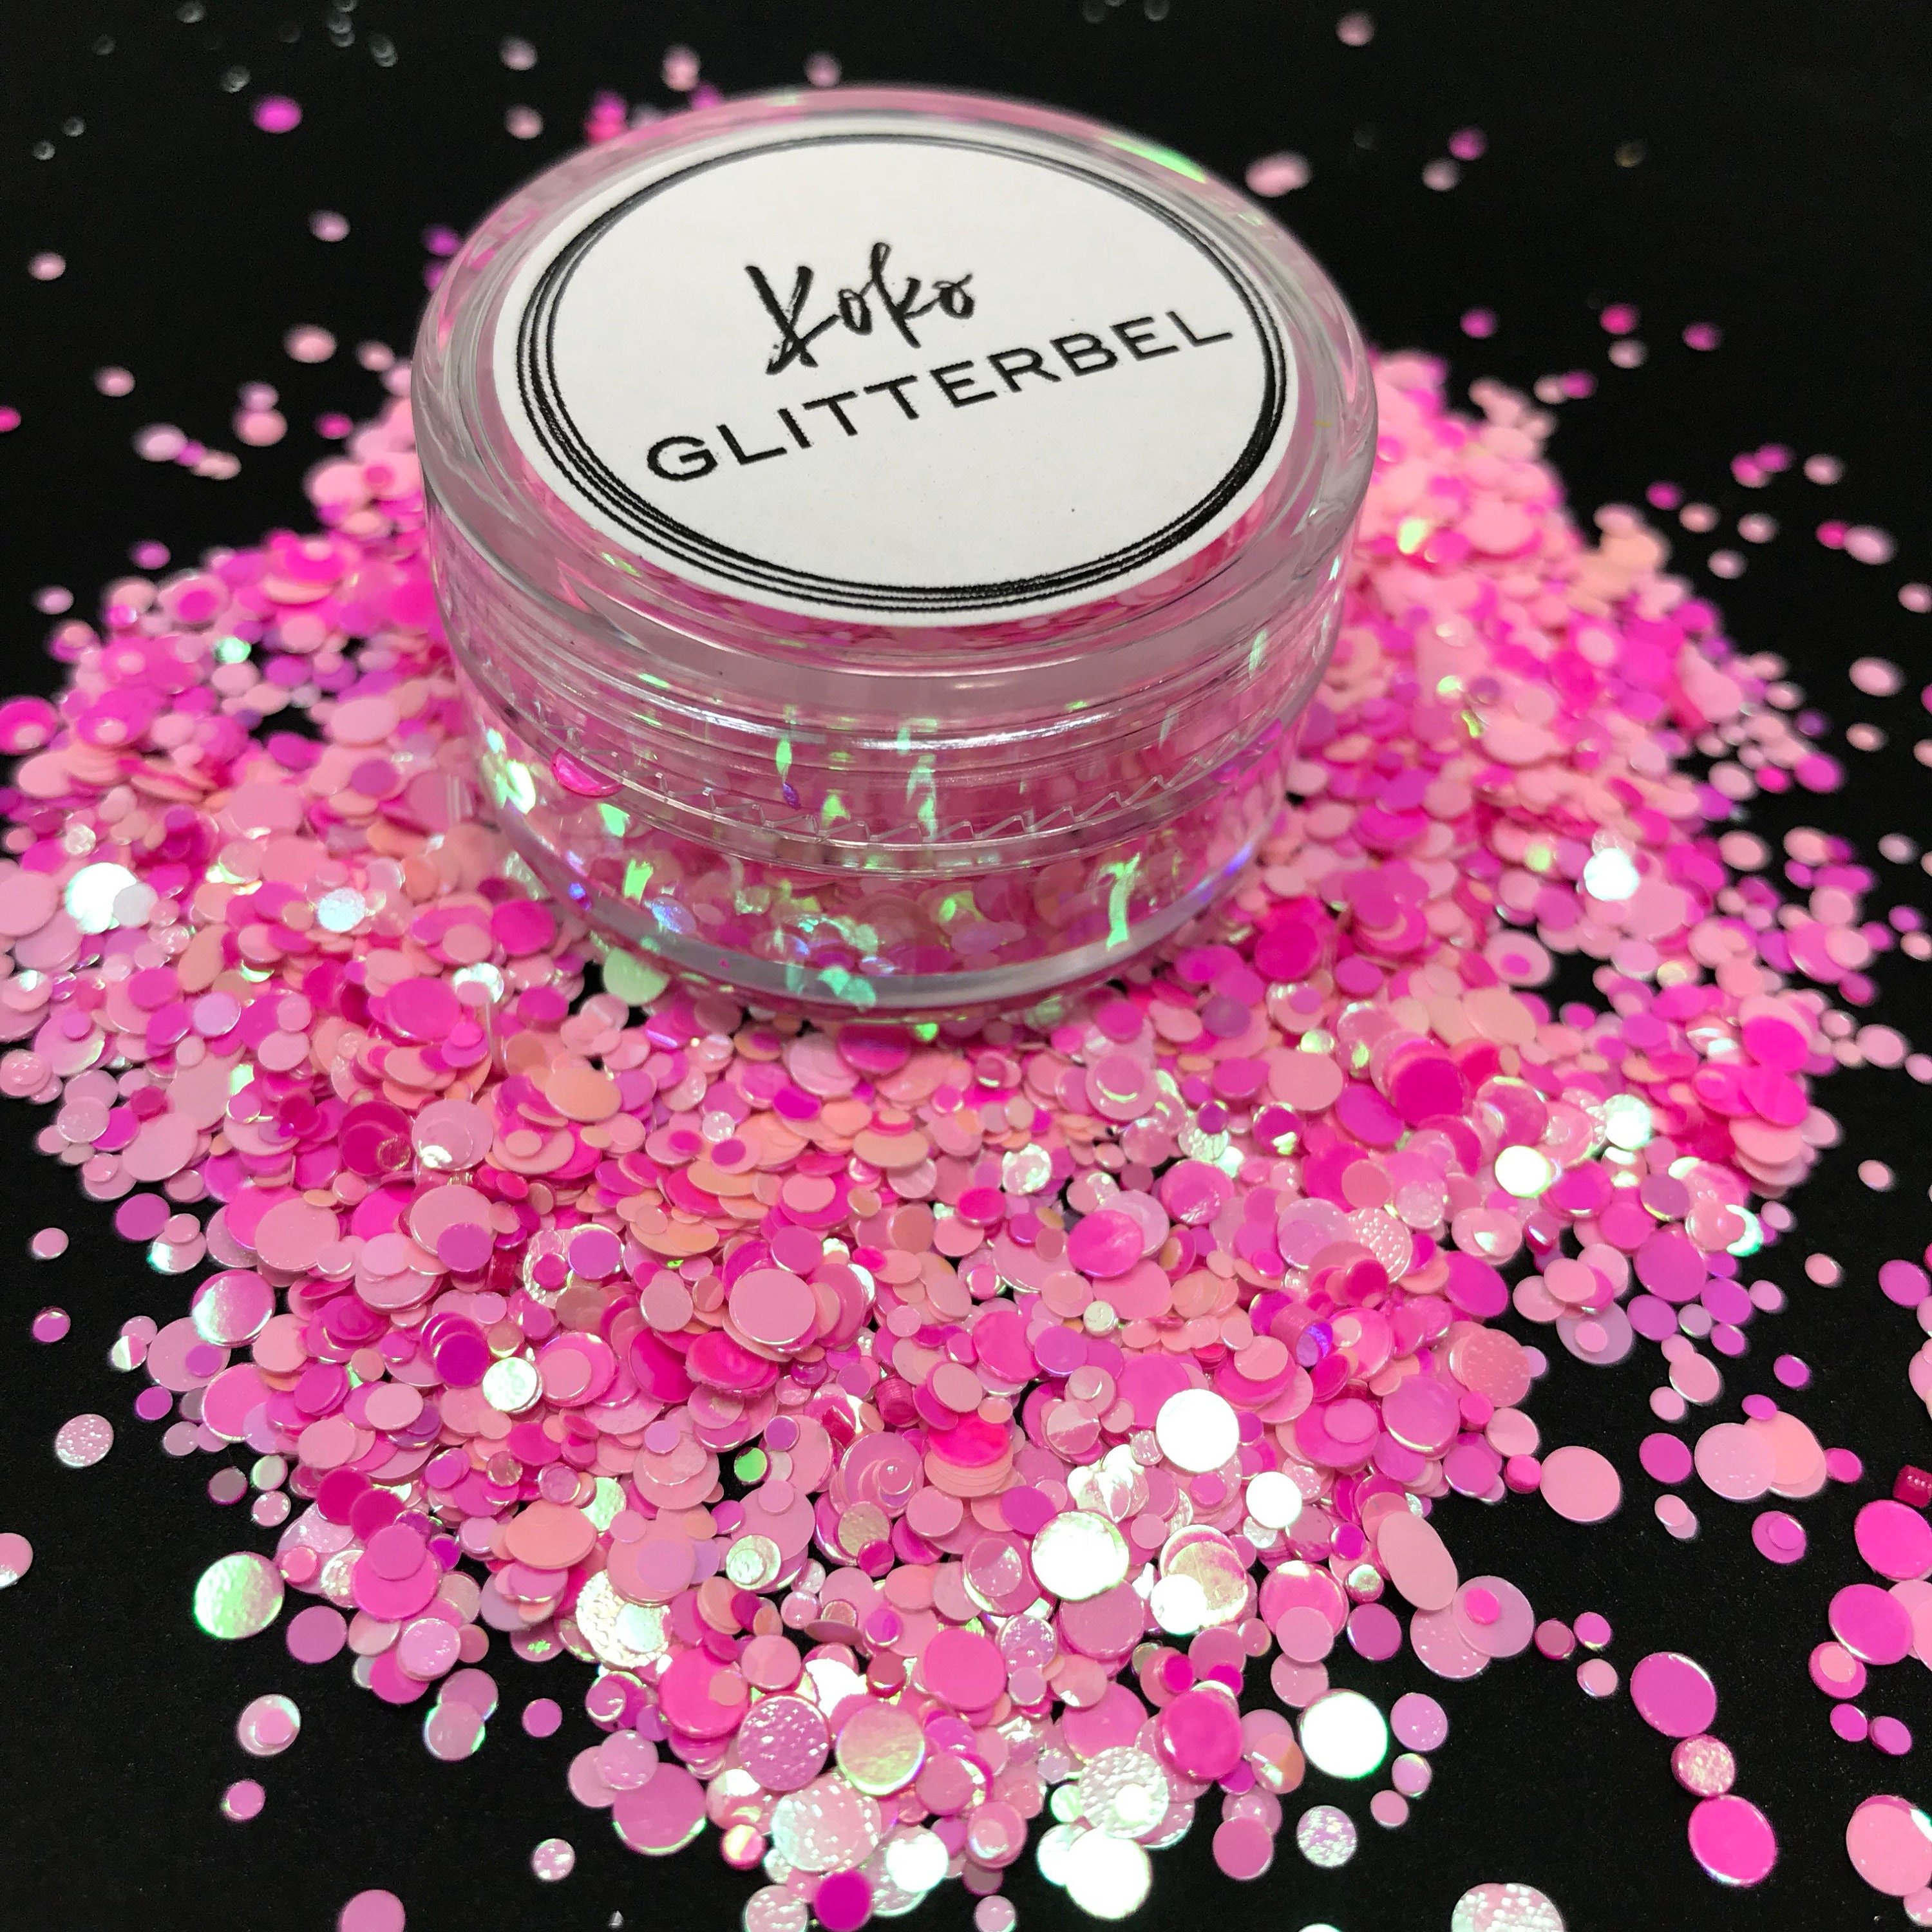 Strawberry & Cream Glitter Dots Pink Solvent Resistant for - Etsy